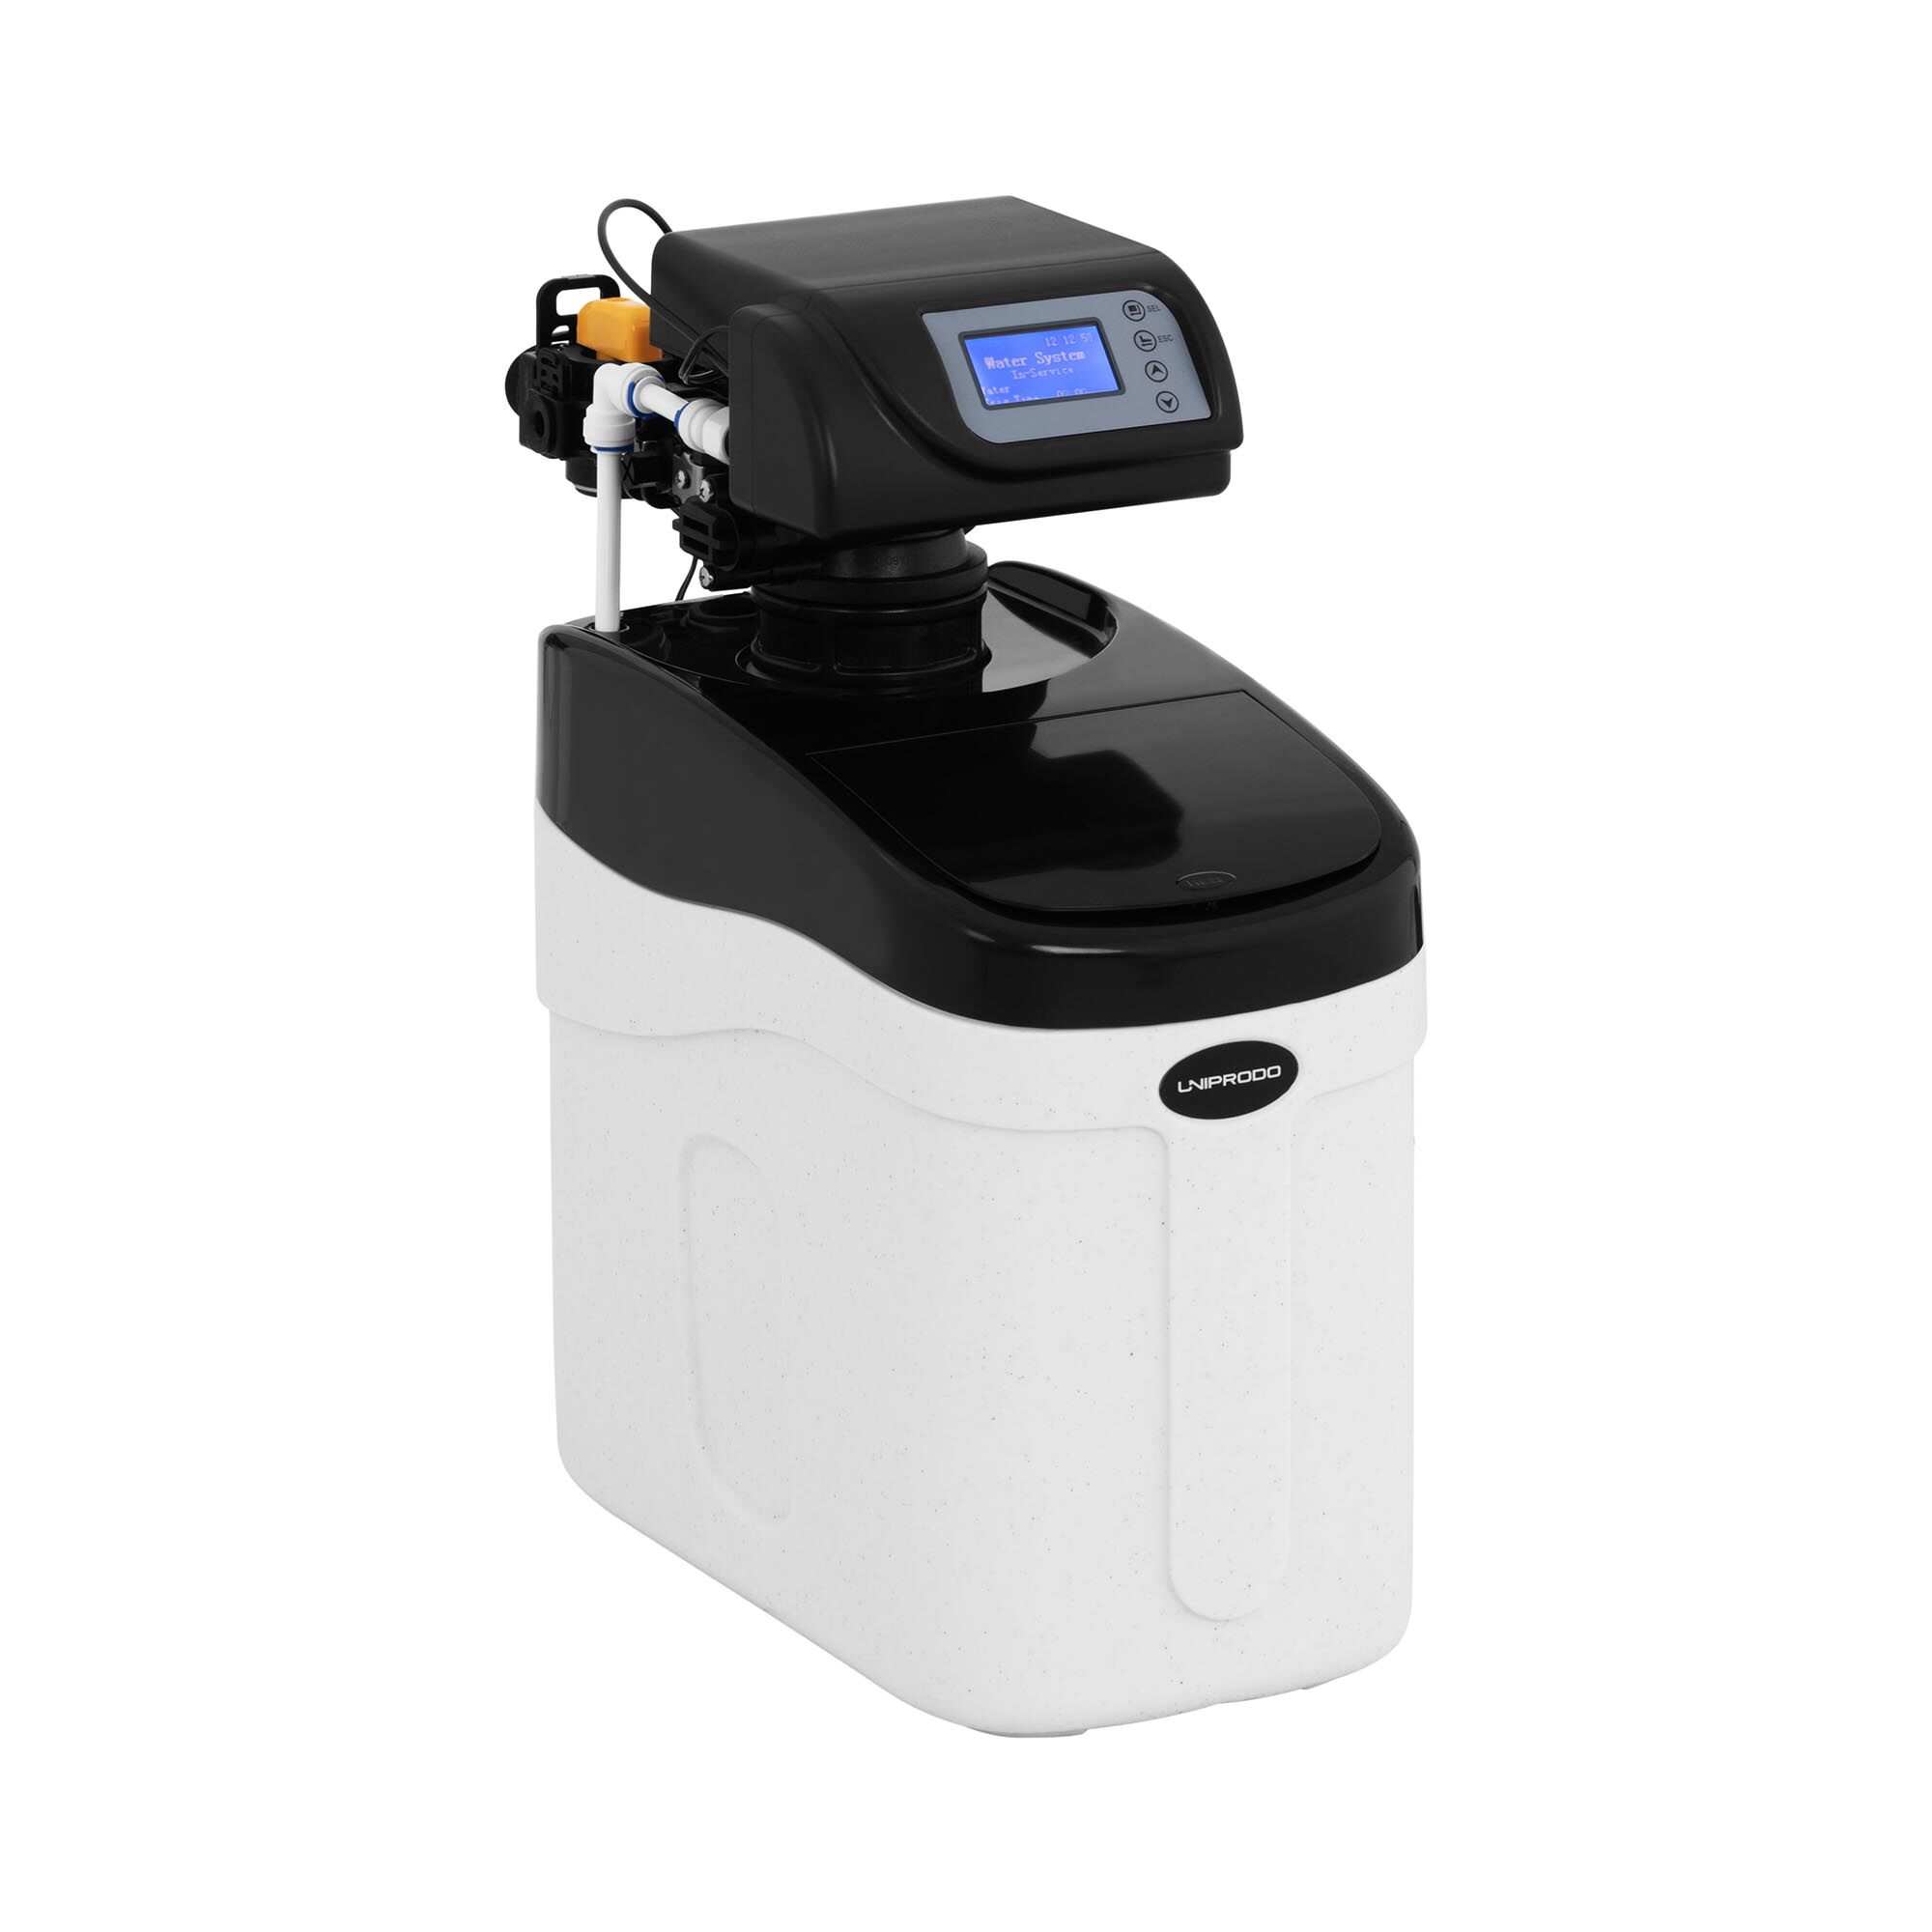 Uniprodo Water Softener System - 1-4 people - 5 L - 1.7-3.1 m³/h